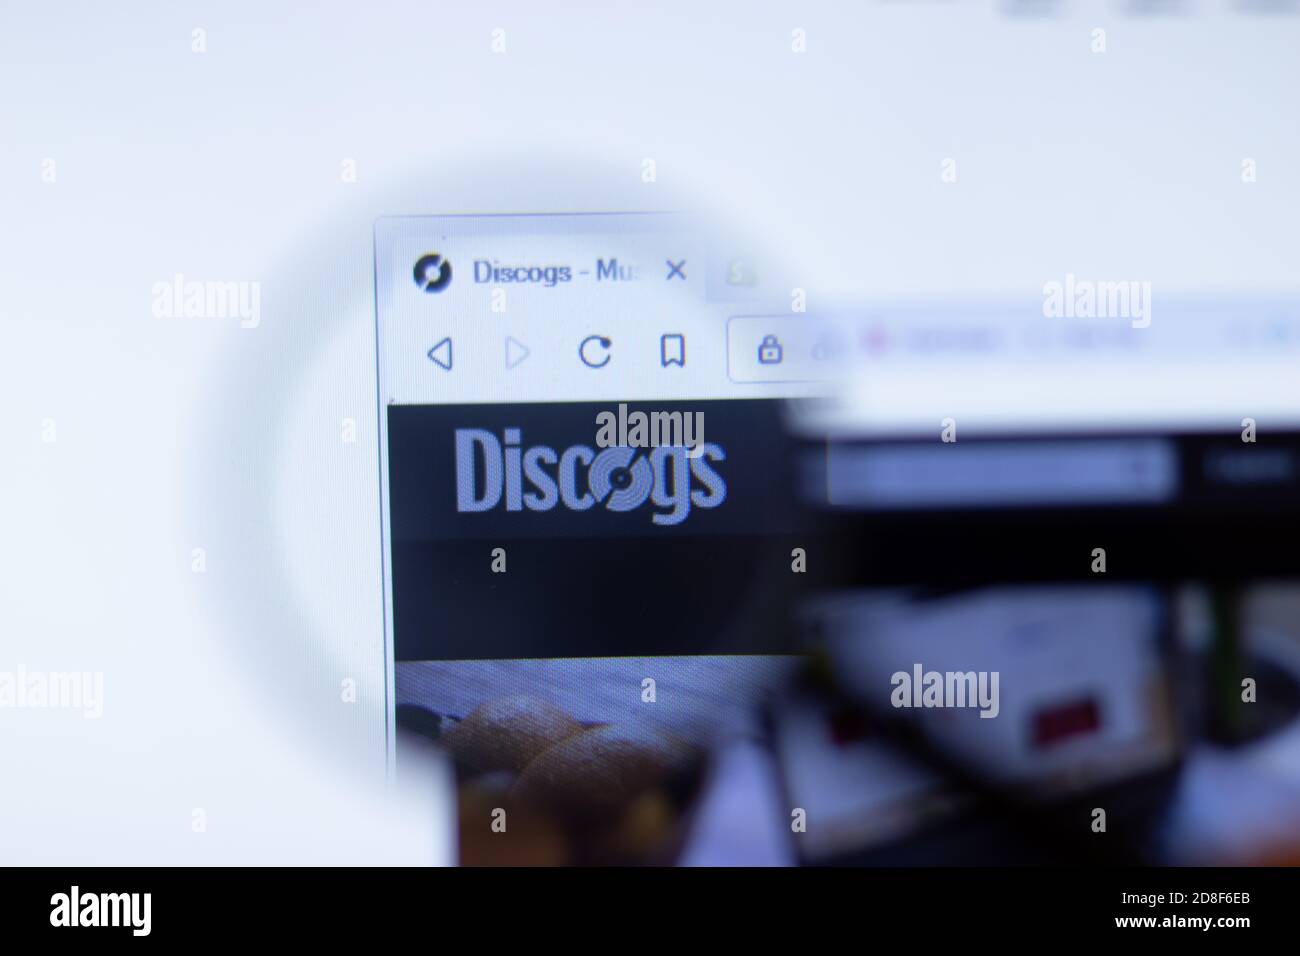 New York, USA - 29 September 2020: Discogs company website with logo close up, Illustrative Editorial Stock Photo